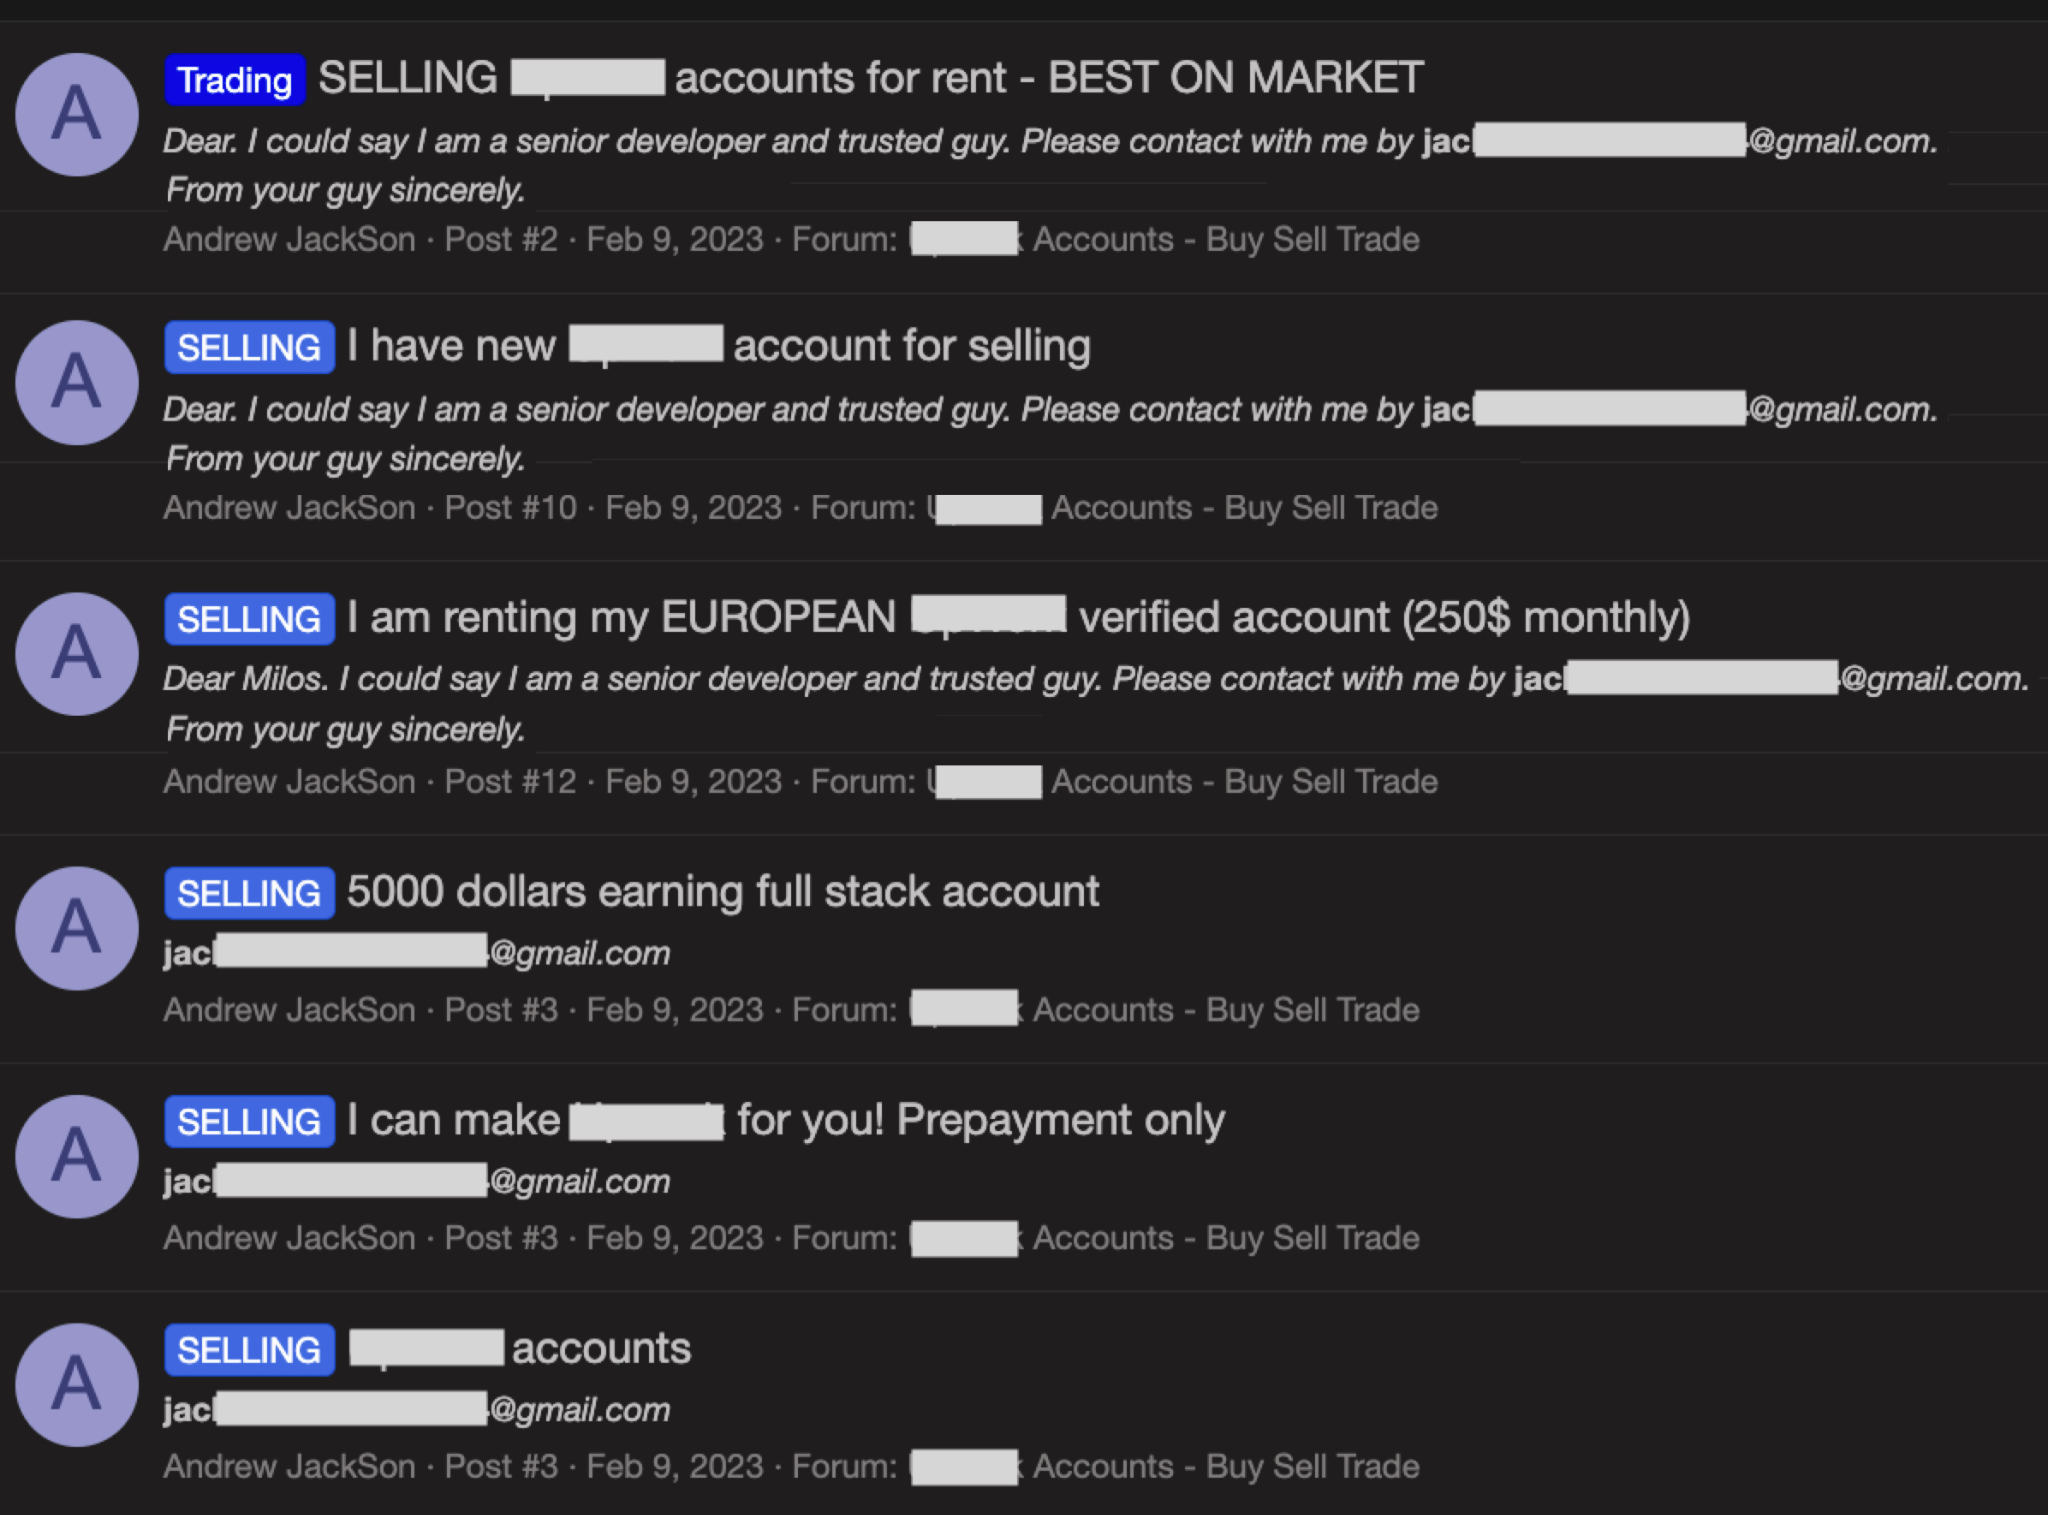 Image 13 is a screenshot of messages from an underground market that sells accounts. Some information is redacted. They are all posted by Andrew JackSon on February 9, 2023. 